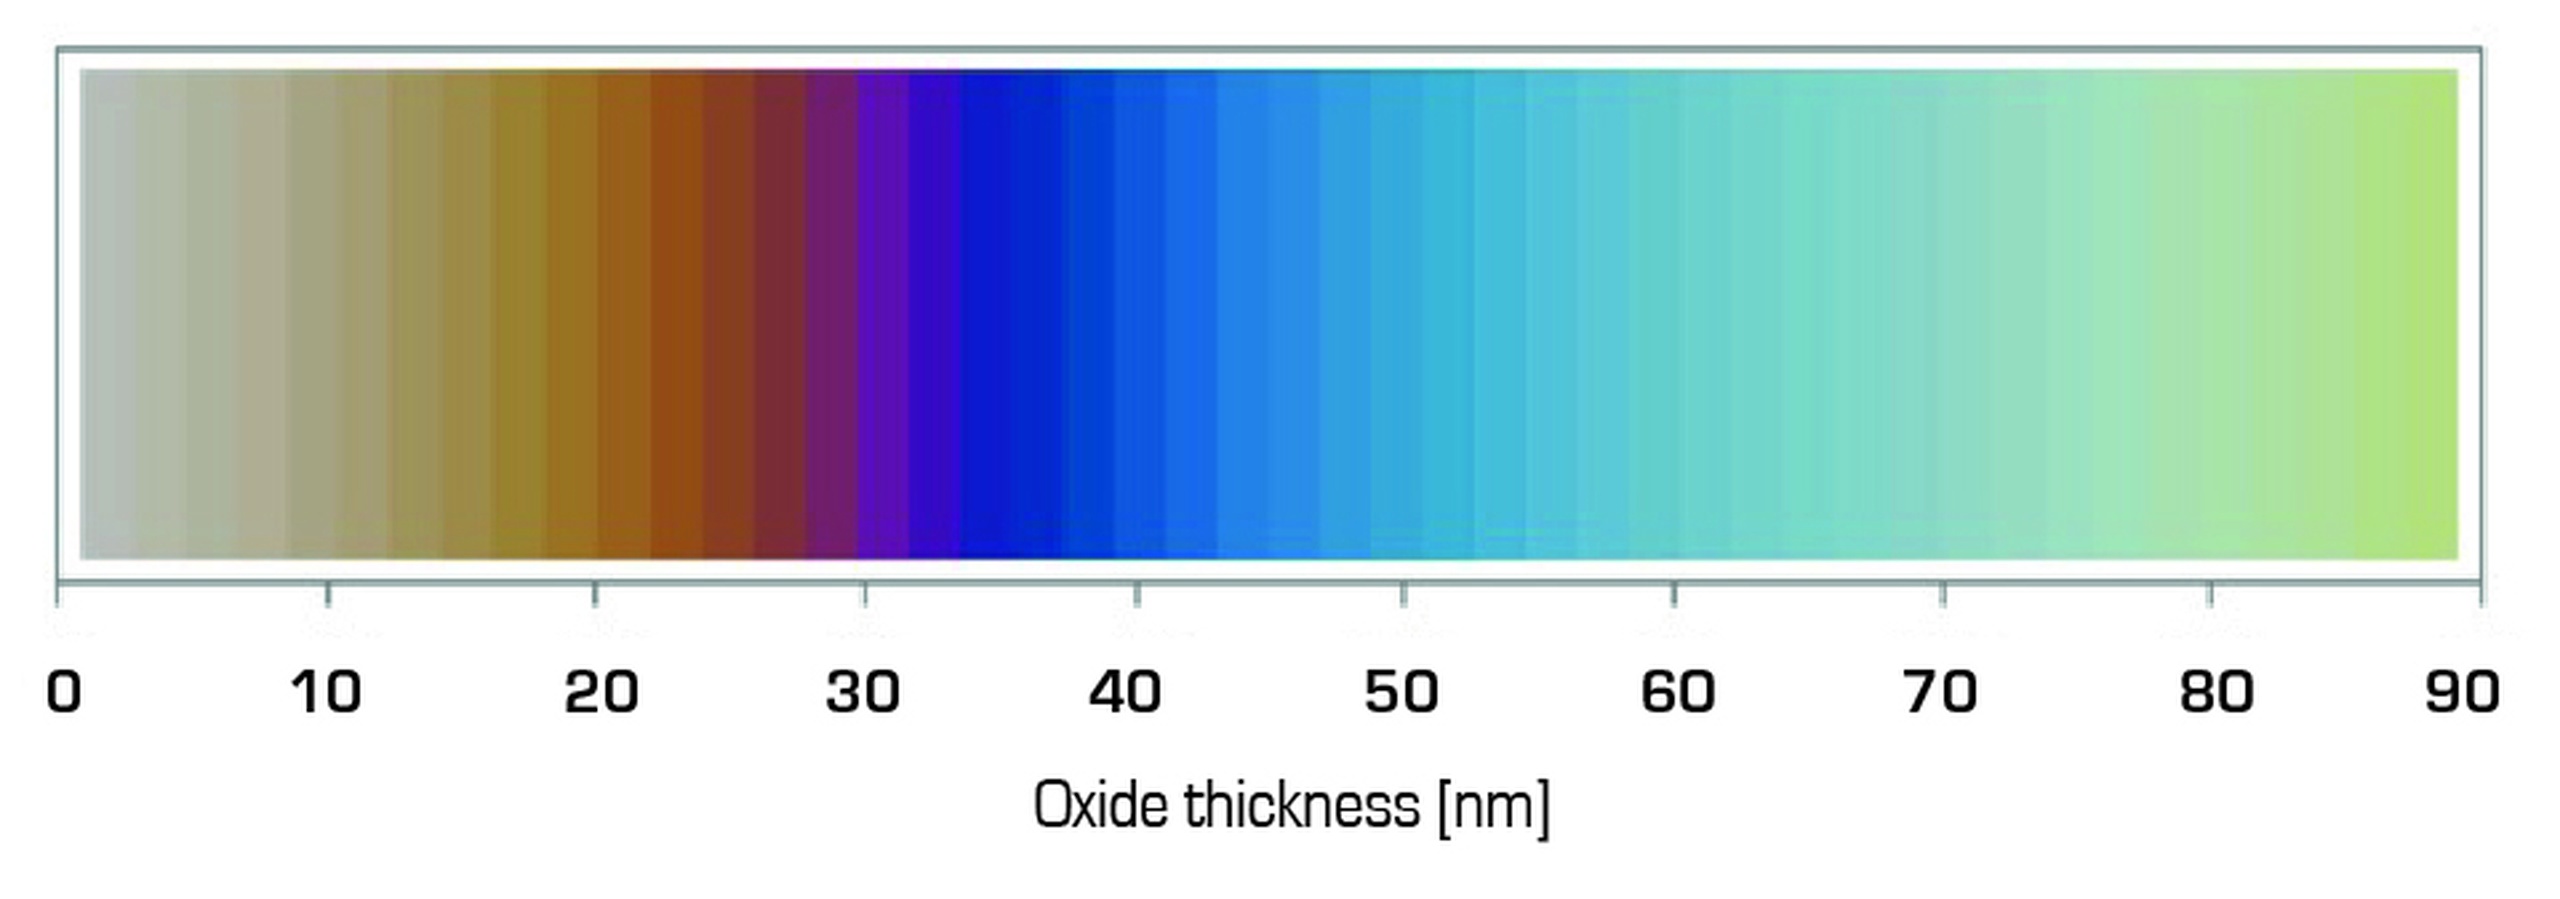 Interference color scale